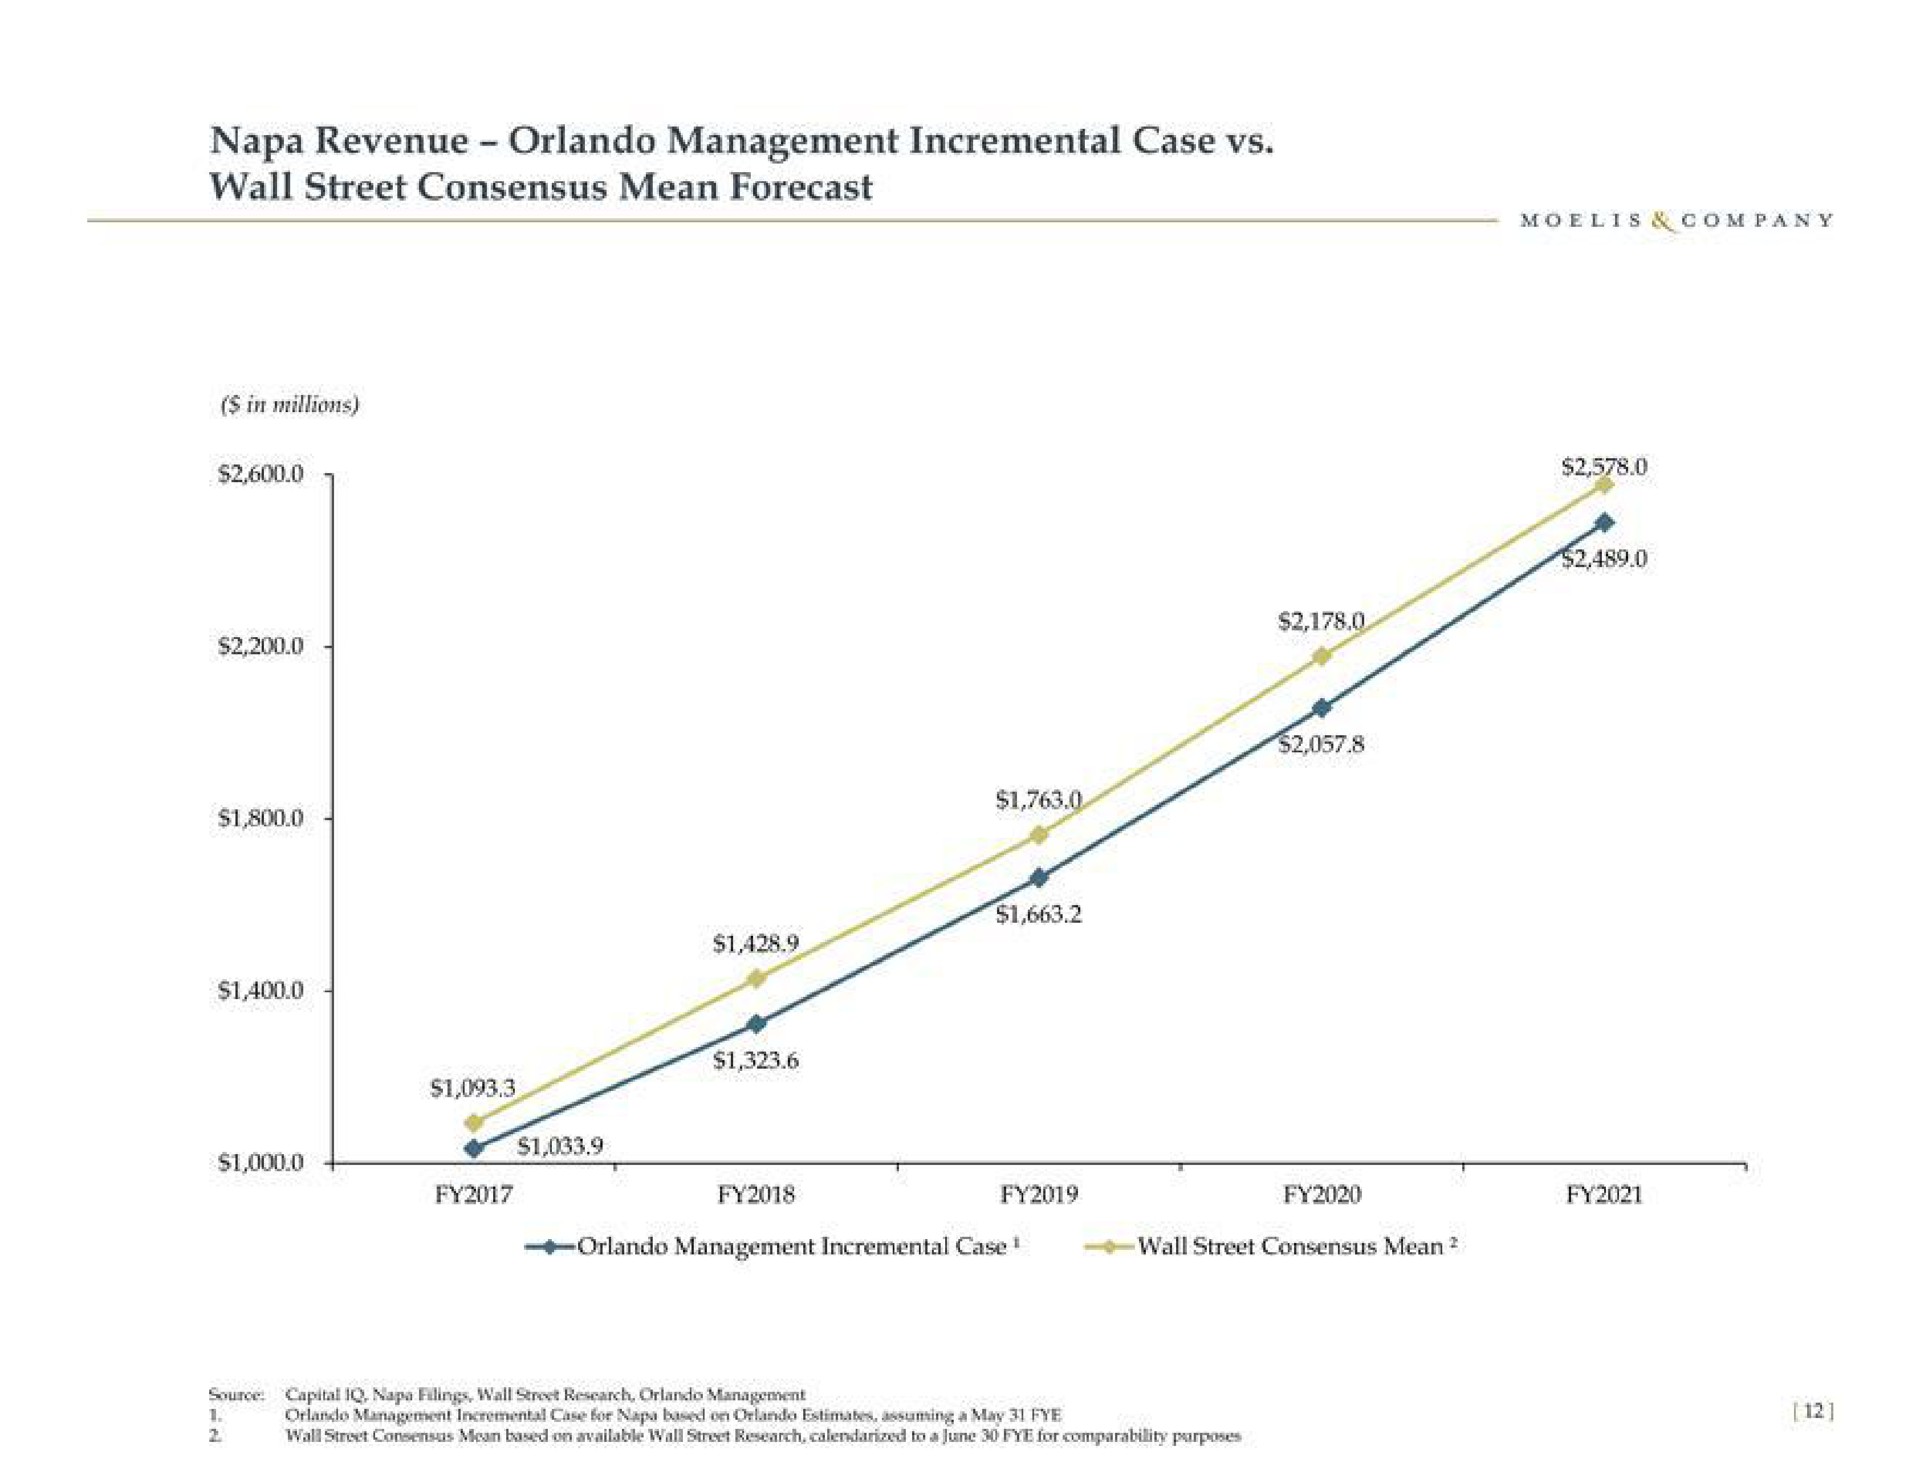 napa revenue management incremental case wall street consensus mean forecast | Moelis & Company